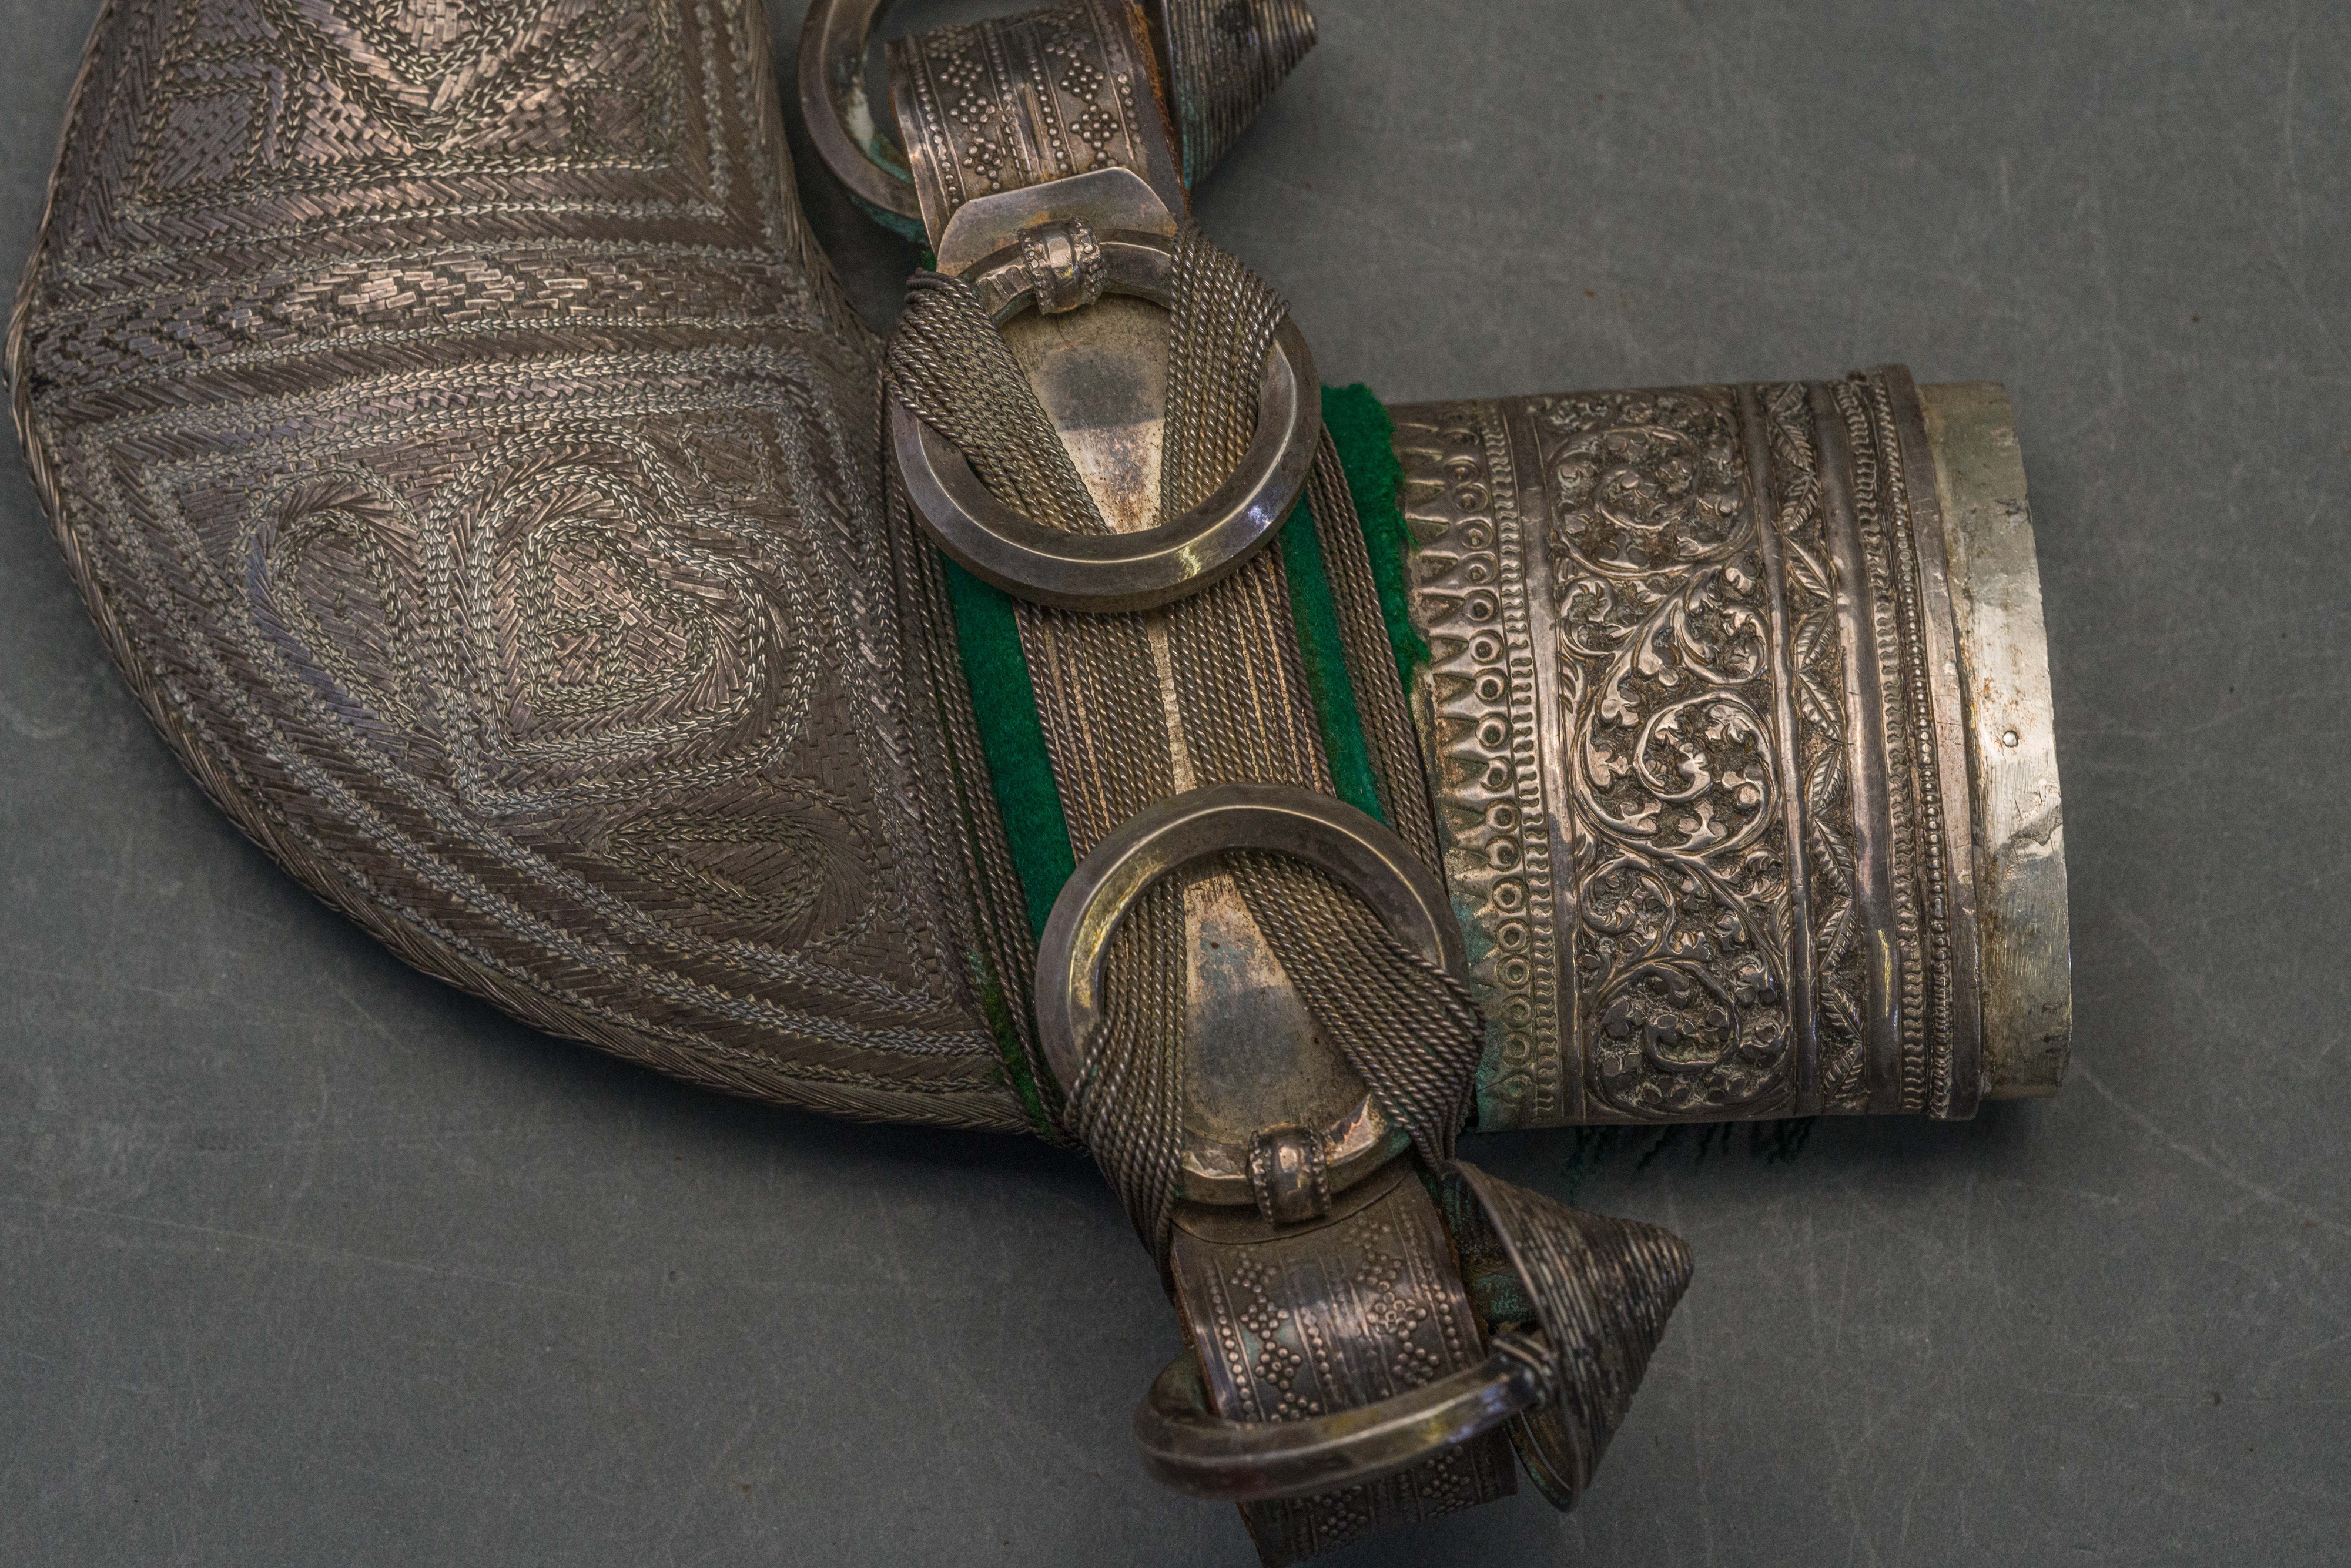 AN ARAB DAGGER (JAMBIYA) WITH SILVER-MOUNTED HILT, EARLY 20TH CENTURY - Image 7 of 10